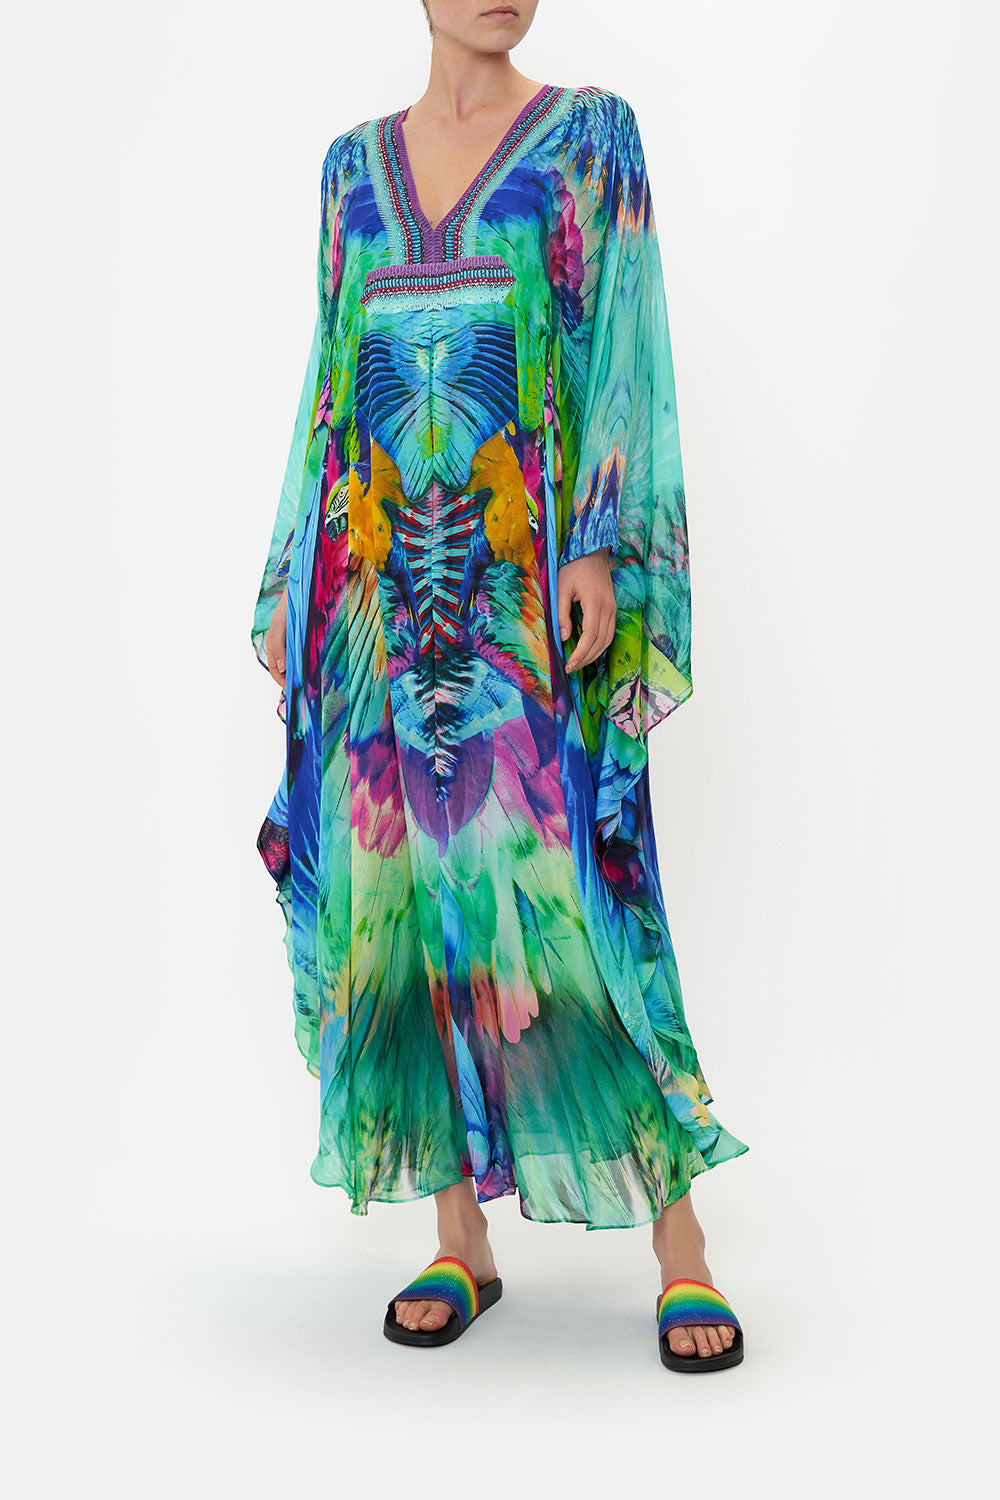 BELTED KAFTAN WITH ARM DETAIL AGE OF ASTERIA – CAMILLA EU